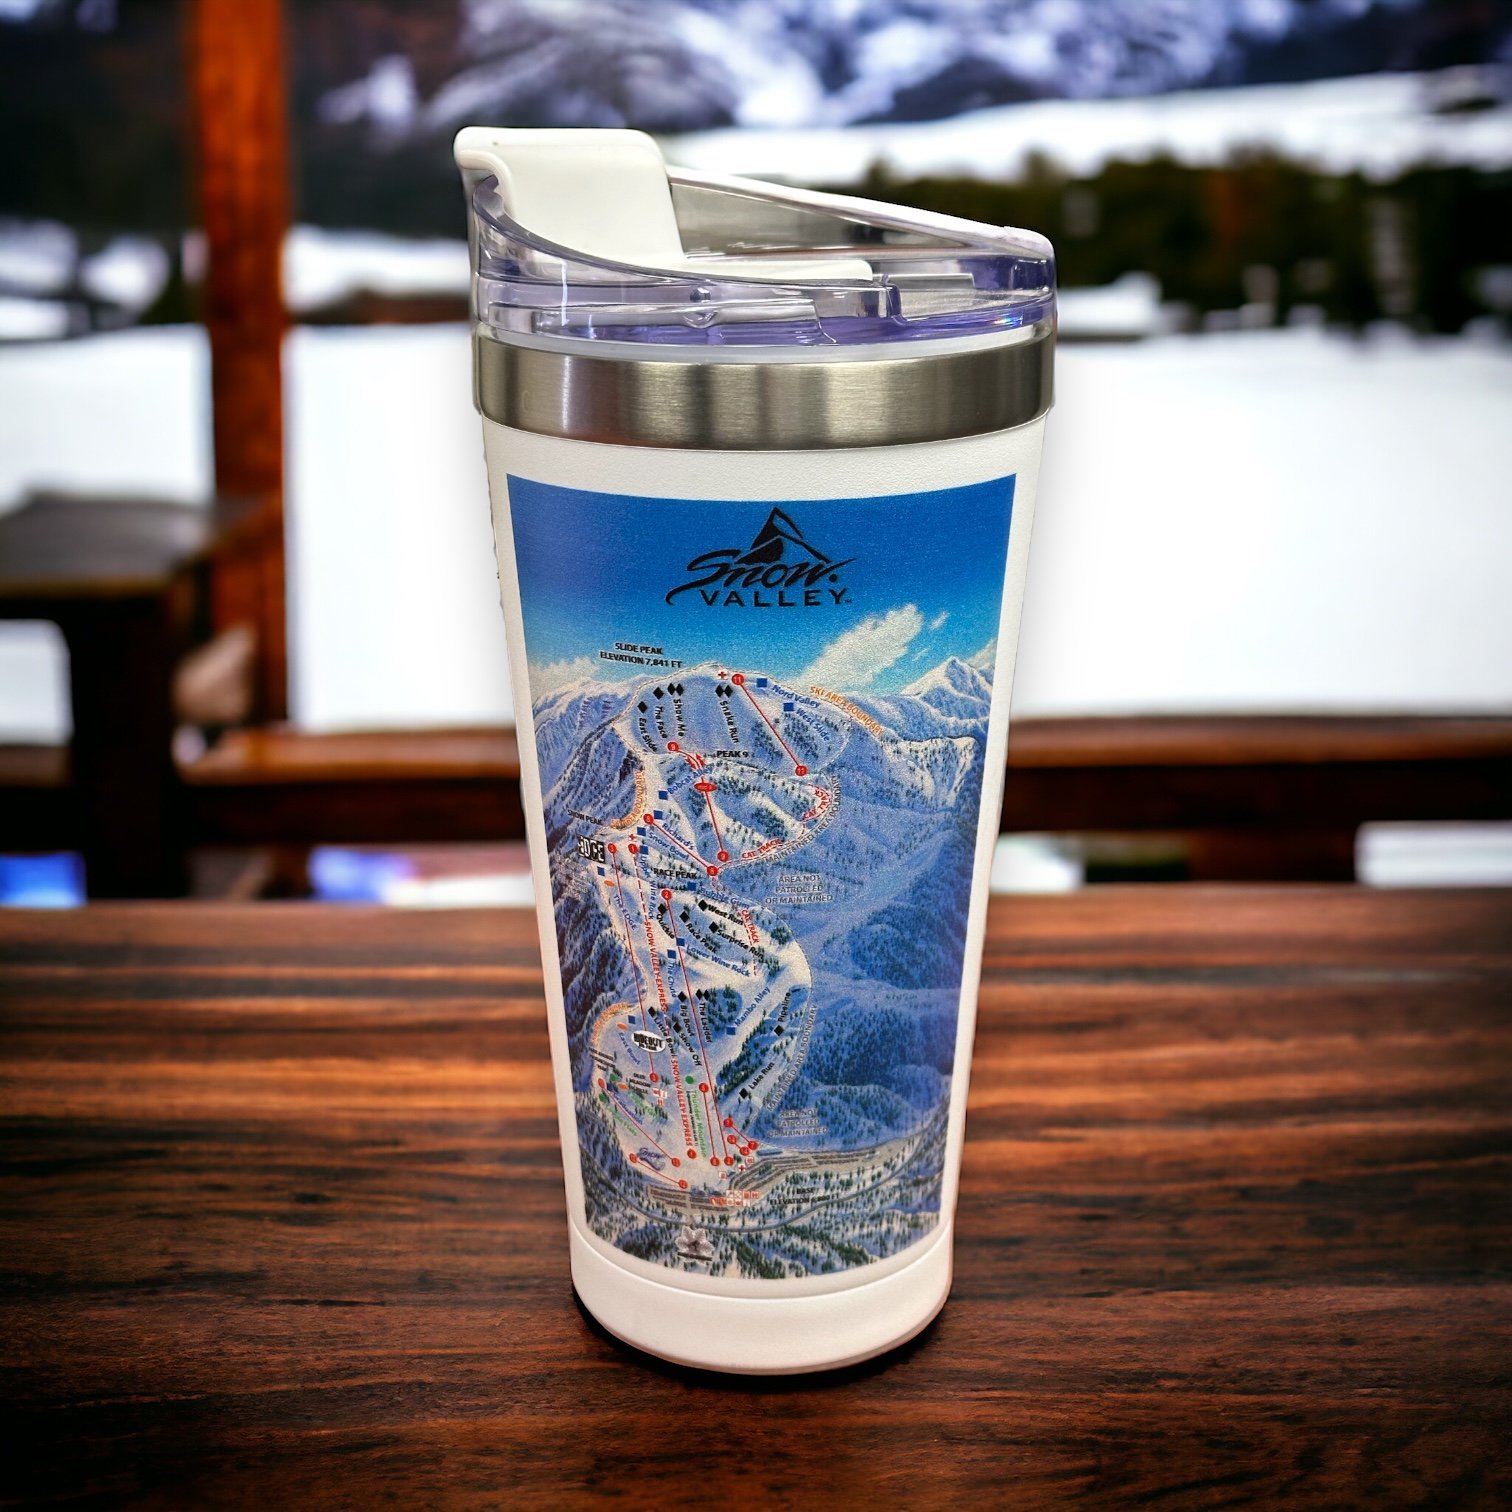 Snow Valley 20 ounce trail map design tumbler